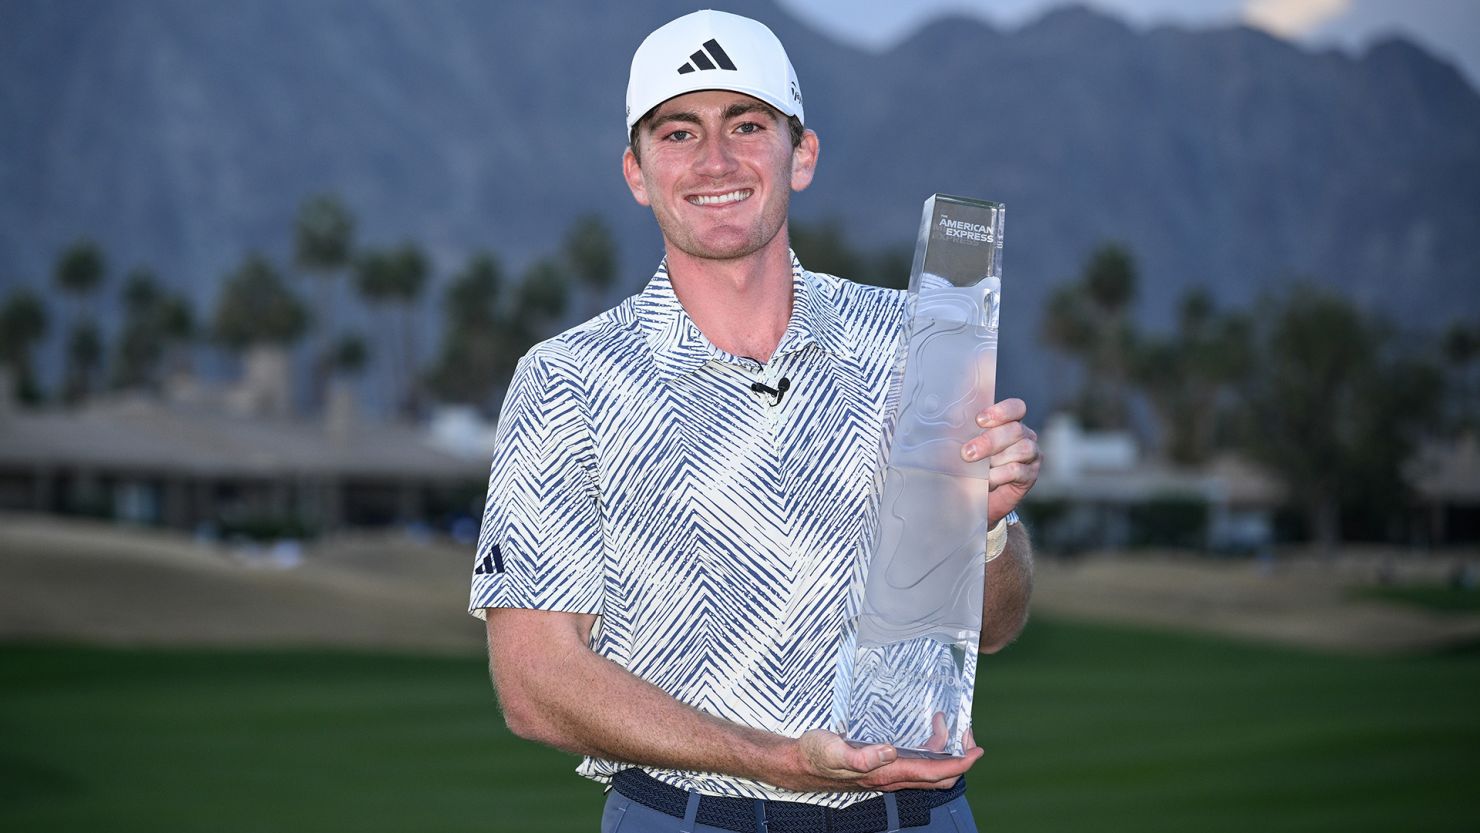 LA QUINTA, CALIFORNIA - JANUARY 21: Nick Dunlap of the United States poses for a photo with the trophy after winning The American Express at Pete Dye Stadium Course on January 21, 2024 in La Quinta, California. (Photo by Orlando Ramirez/Getty Images)